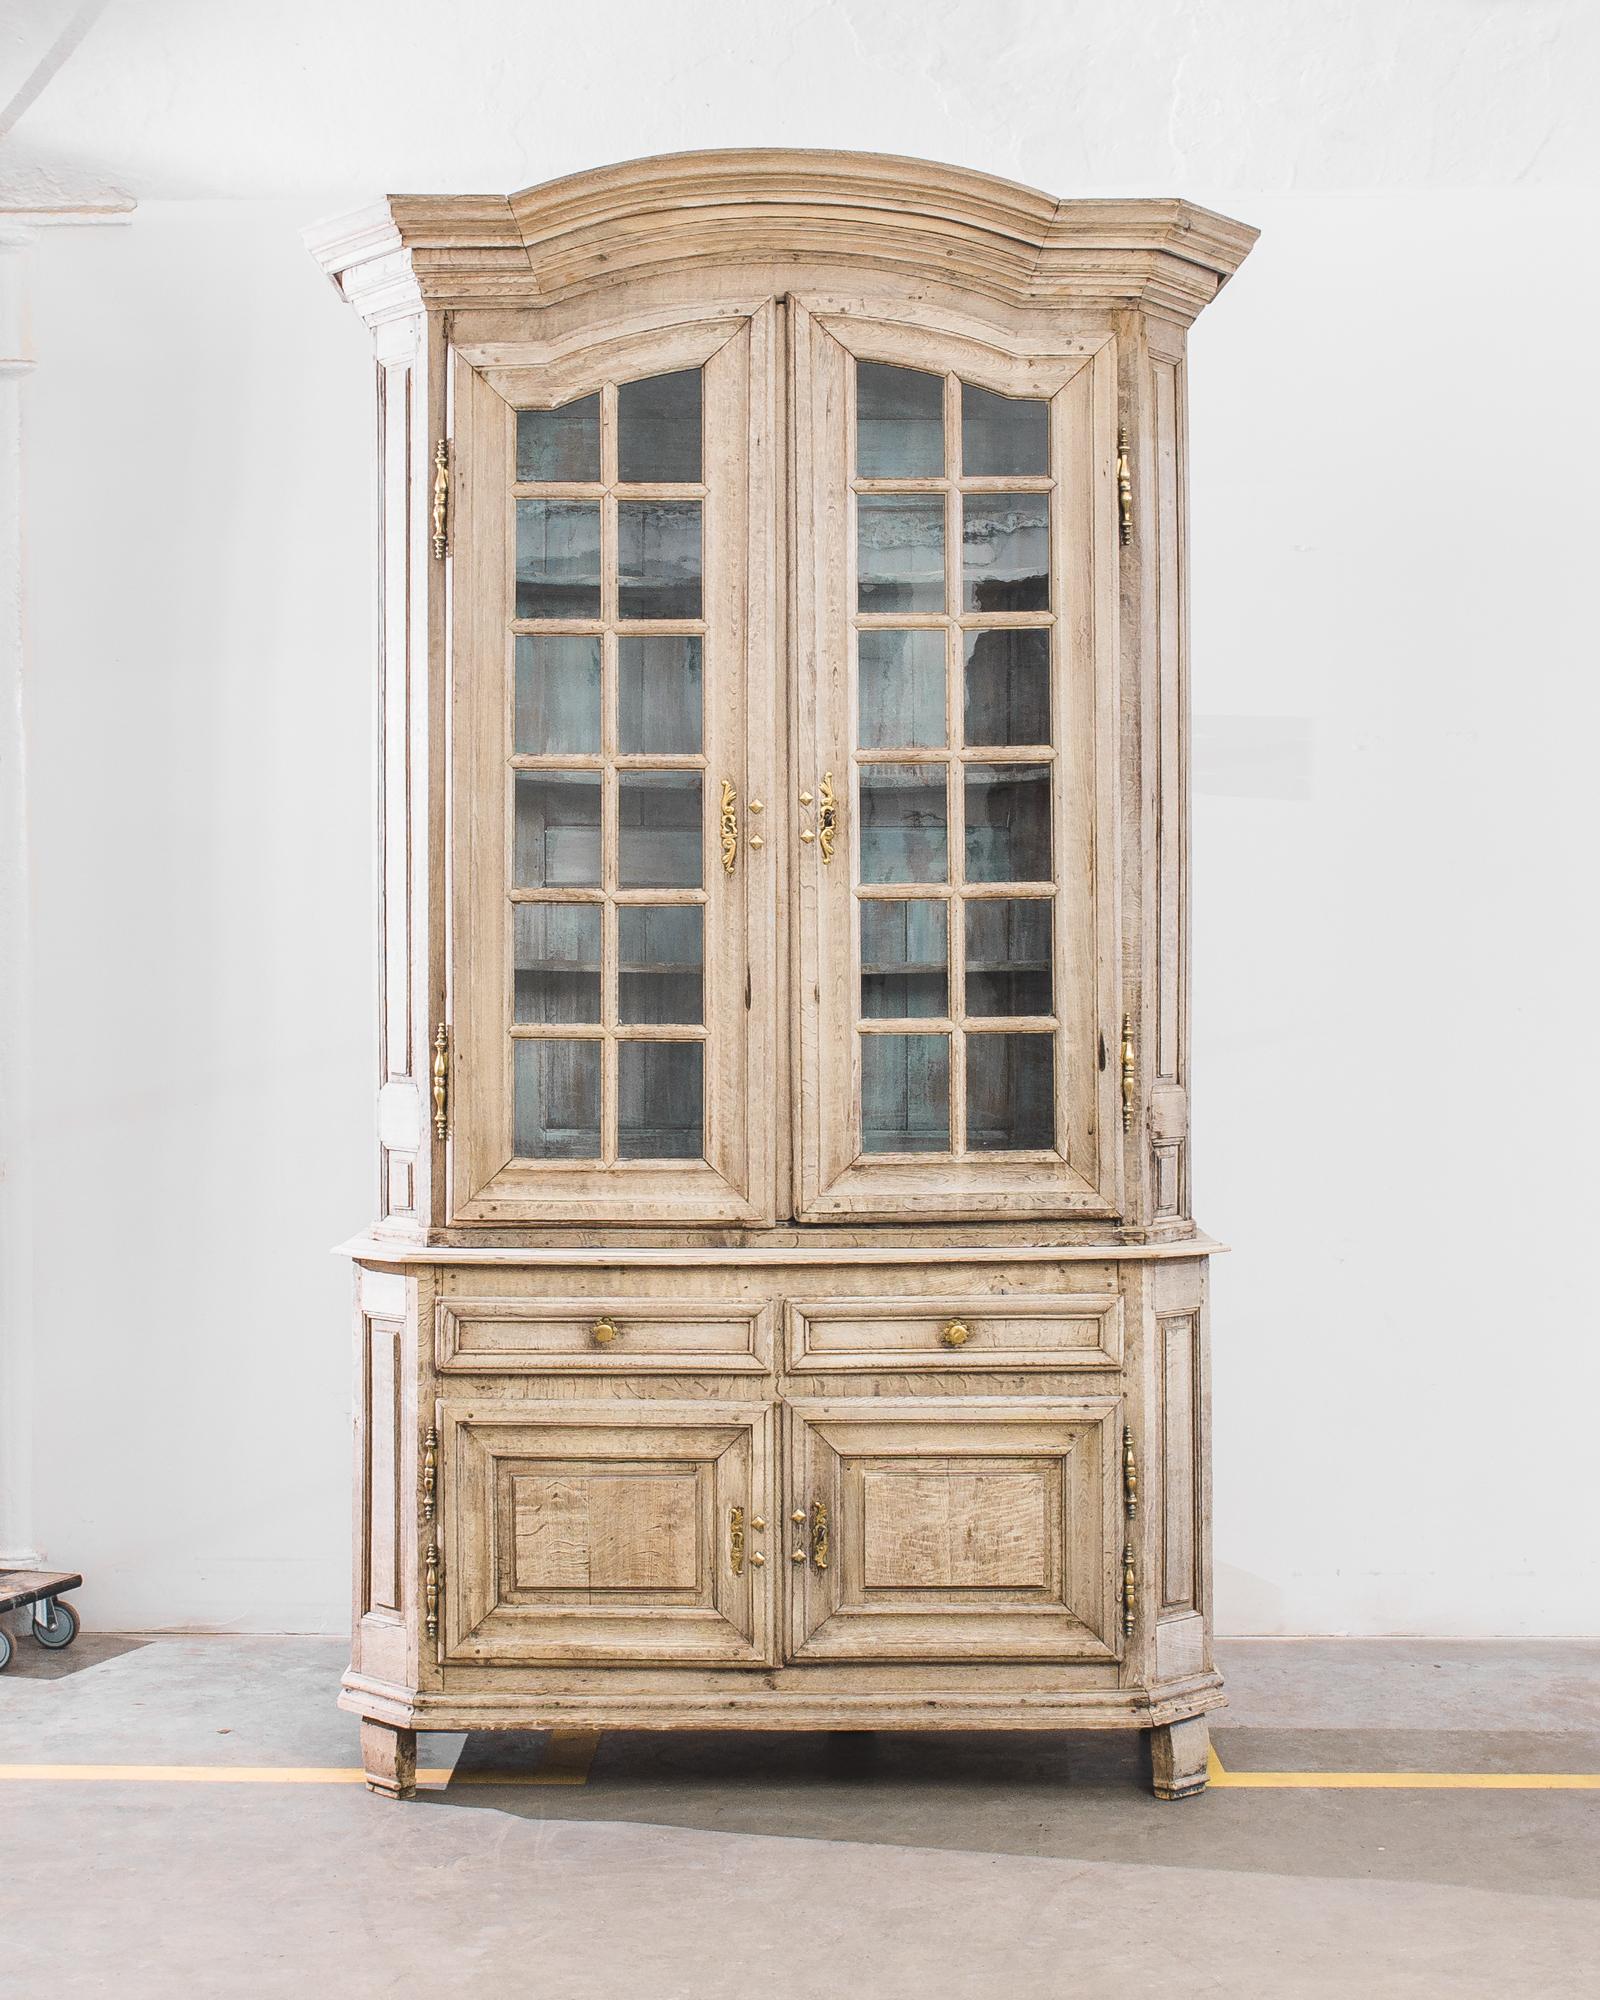 Defined by characteristics of simplicity, taste and functionality, this French à deux corps bleach oak vitrine was assembled circa 1800. Boasting two tall glass doors resting over a commode with two drawers and raised panel doors. A curious touch: